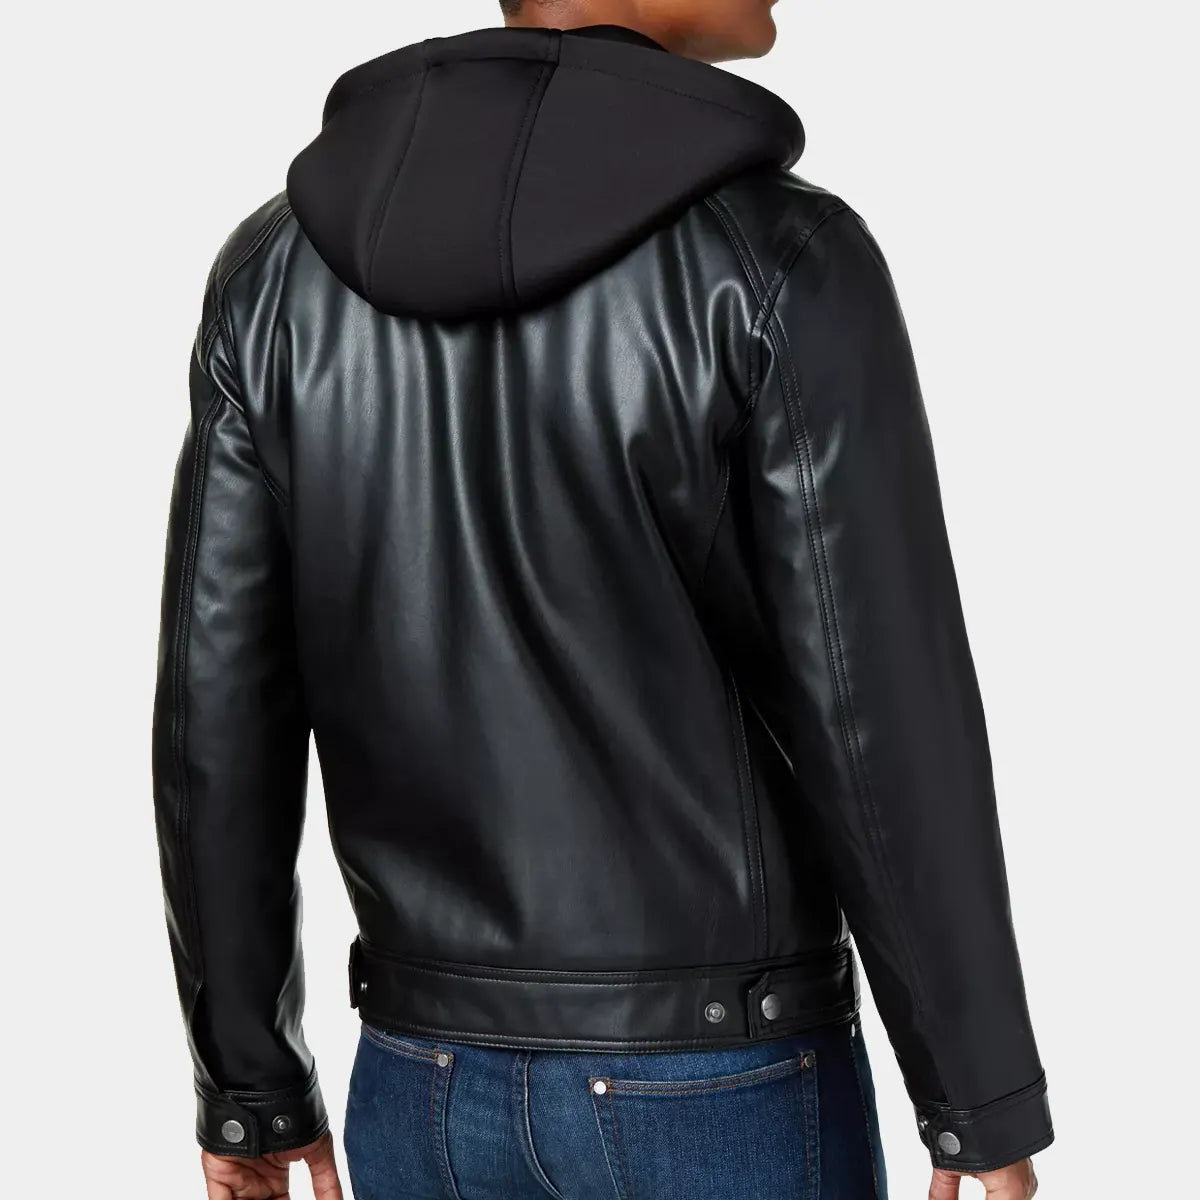 Men Black Leather Jacket with Removeable hood